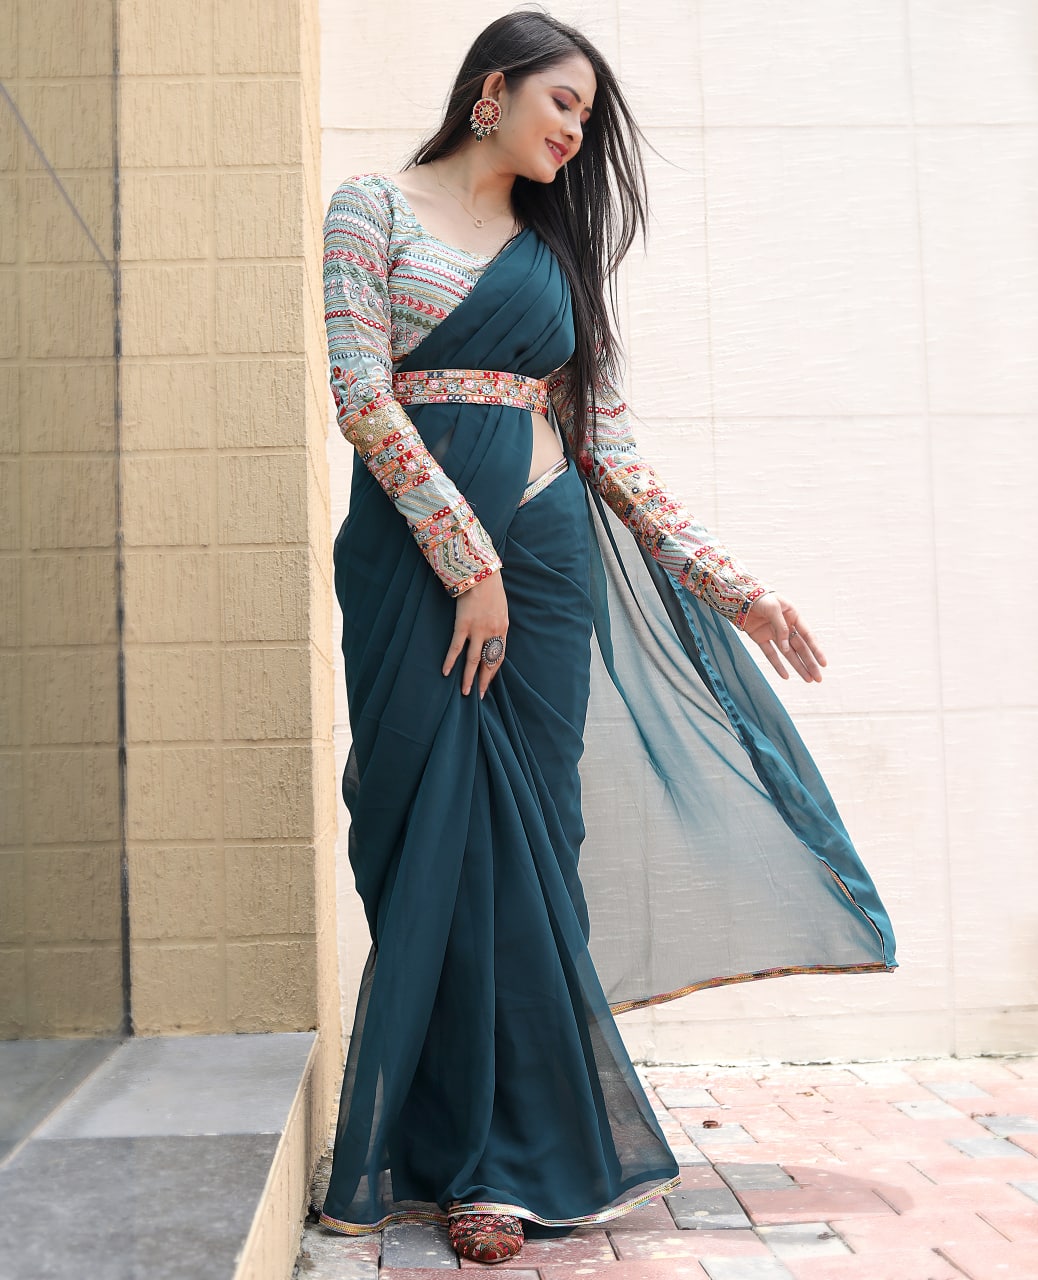 20 Bollywood Retro Look Style Outfit Ideas For You - BoldBlush